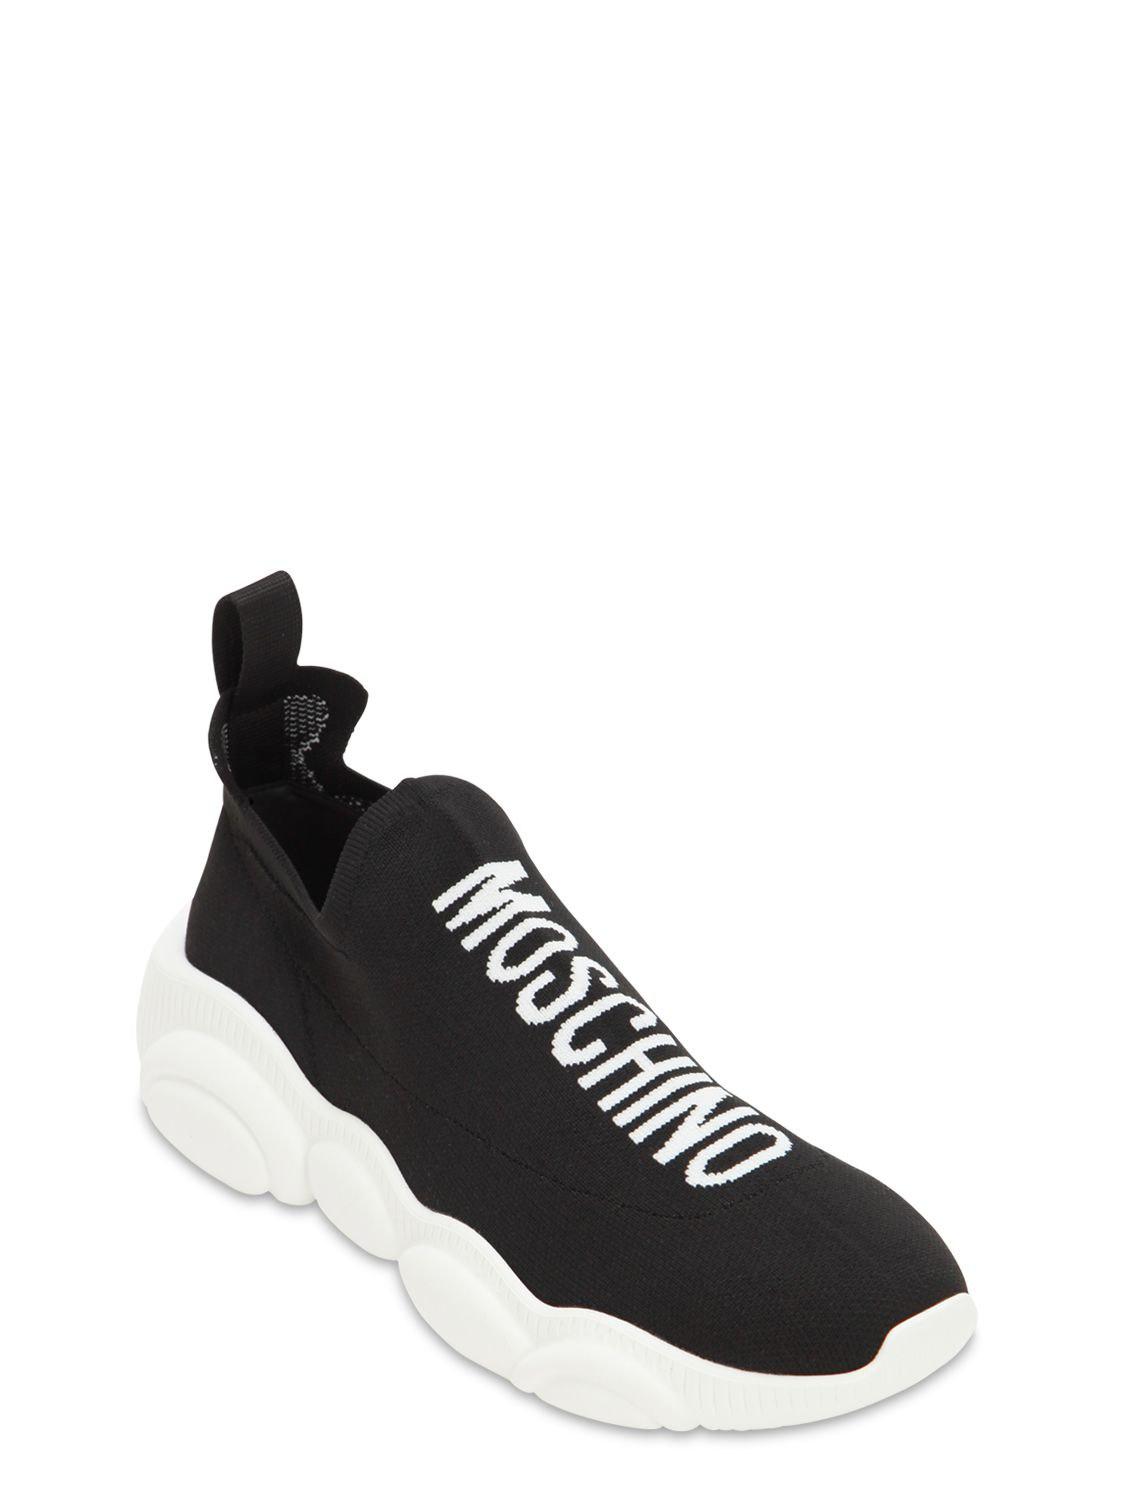 Moschino Leather Logo Sneakers in Black 